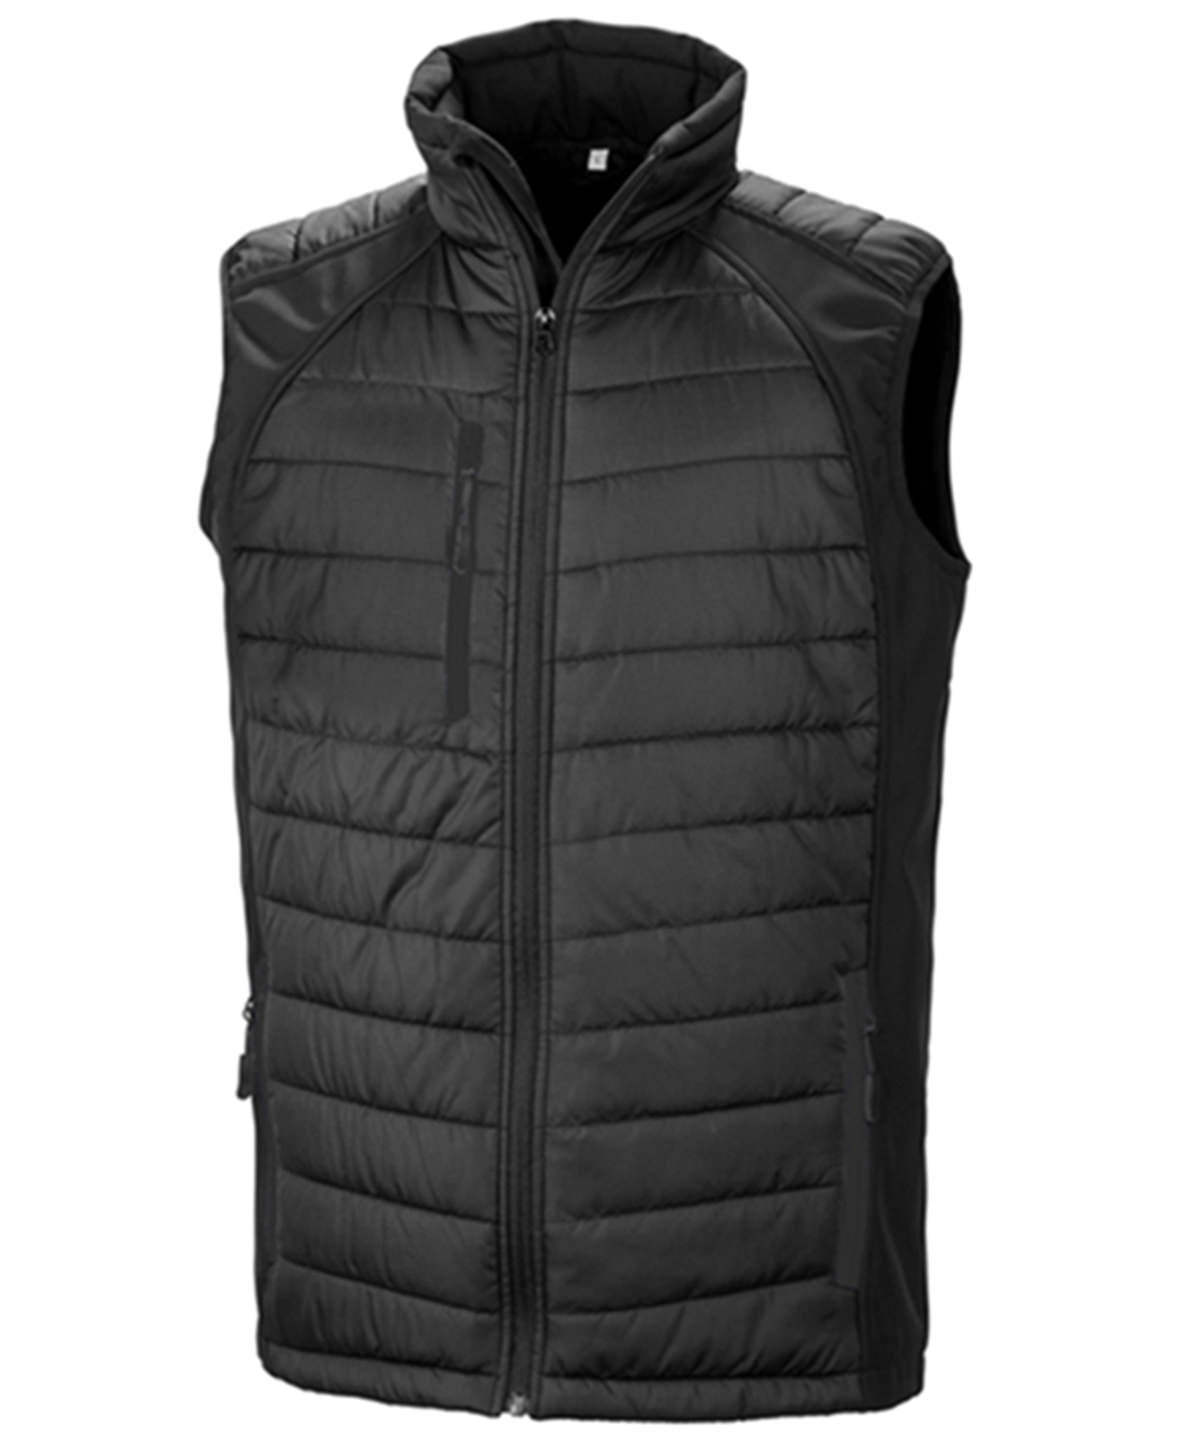 Cooksport Renault Cup Unisex Padded Softshell Gilet